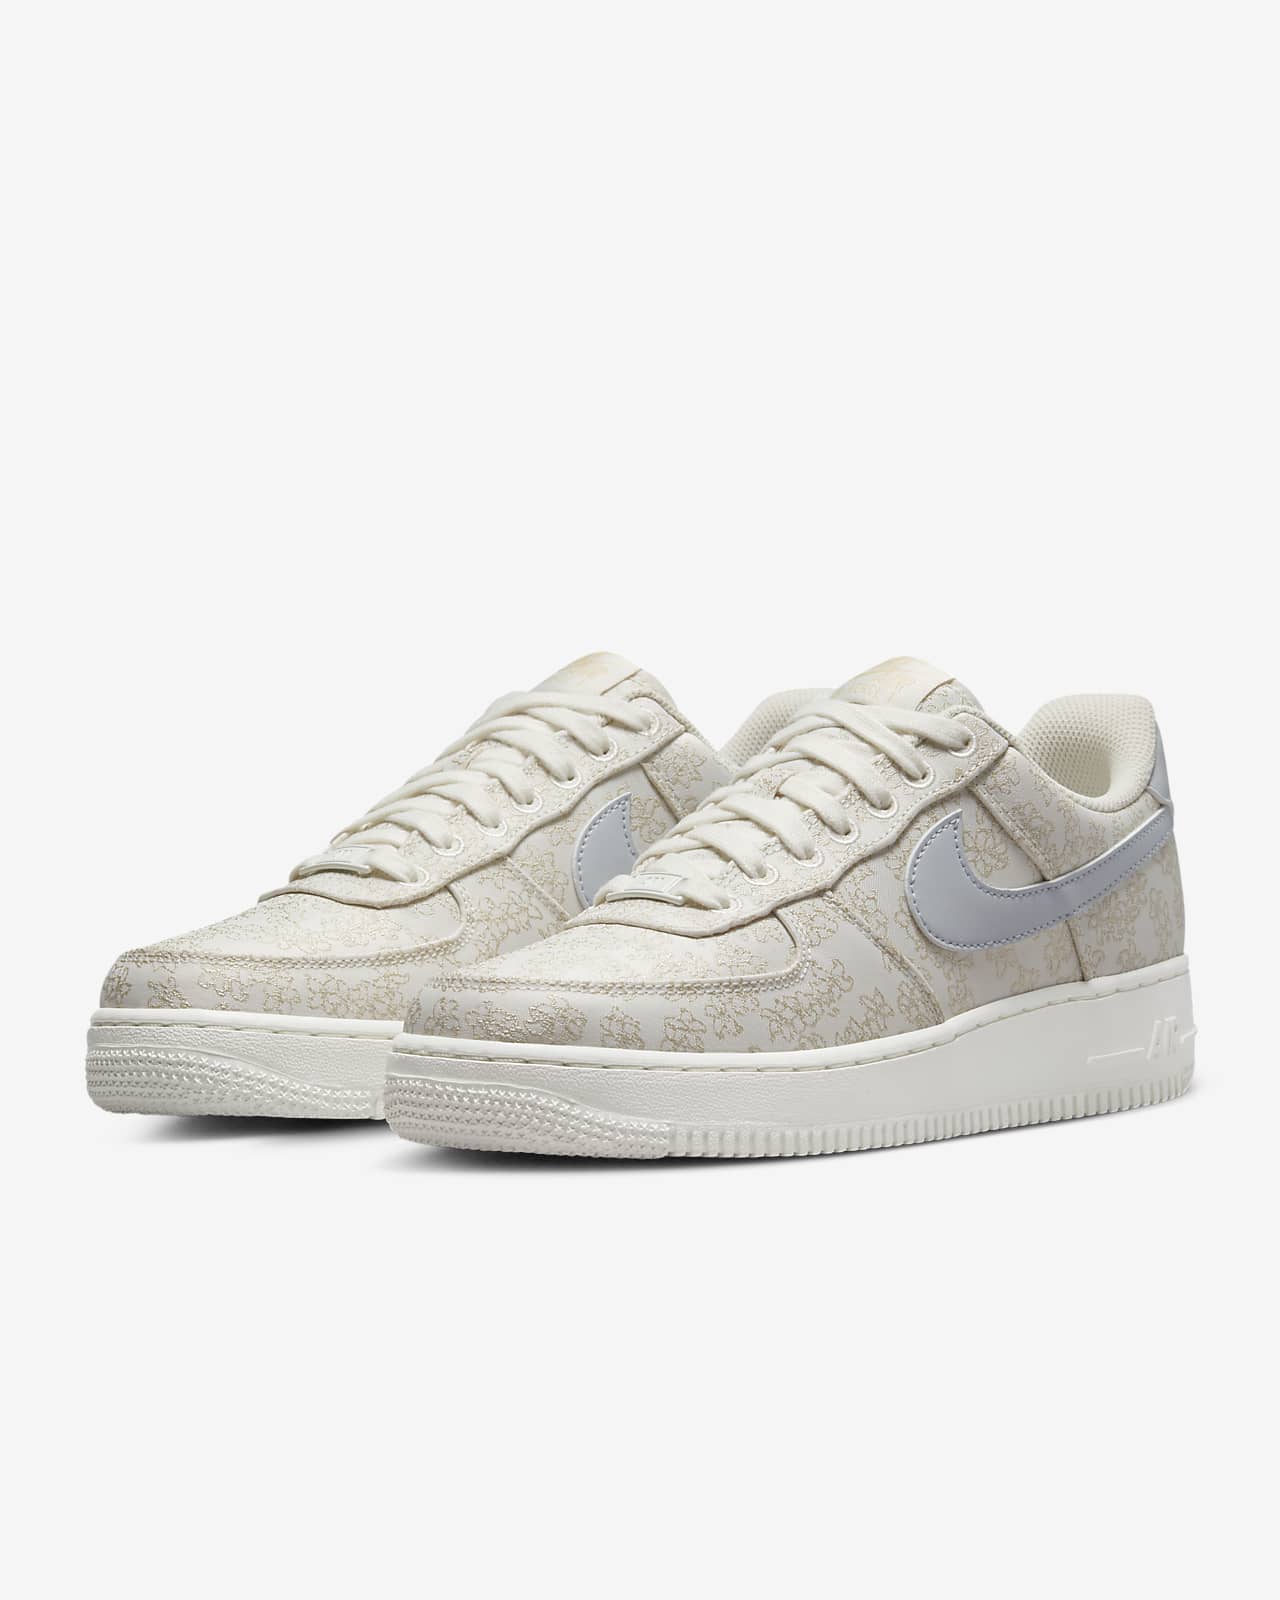 Nike Air Force 1 '07 SE Women's Shoes 7.5